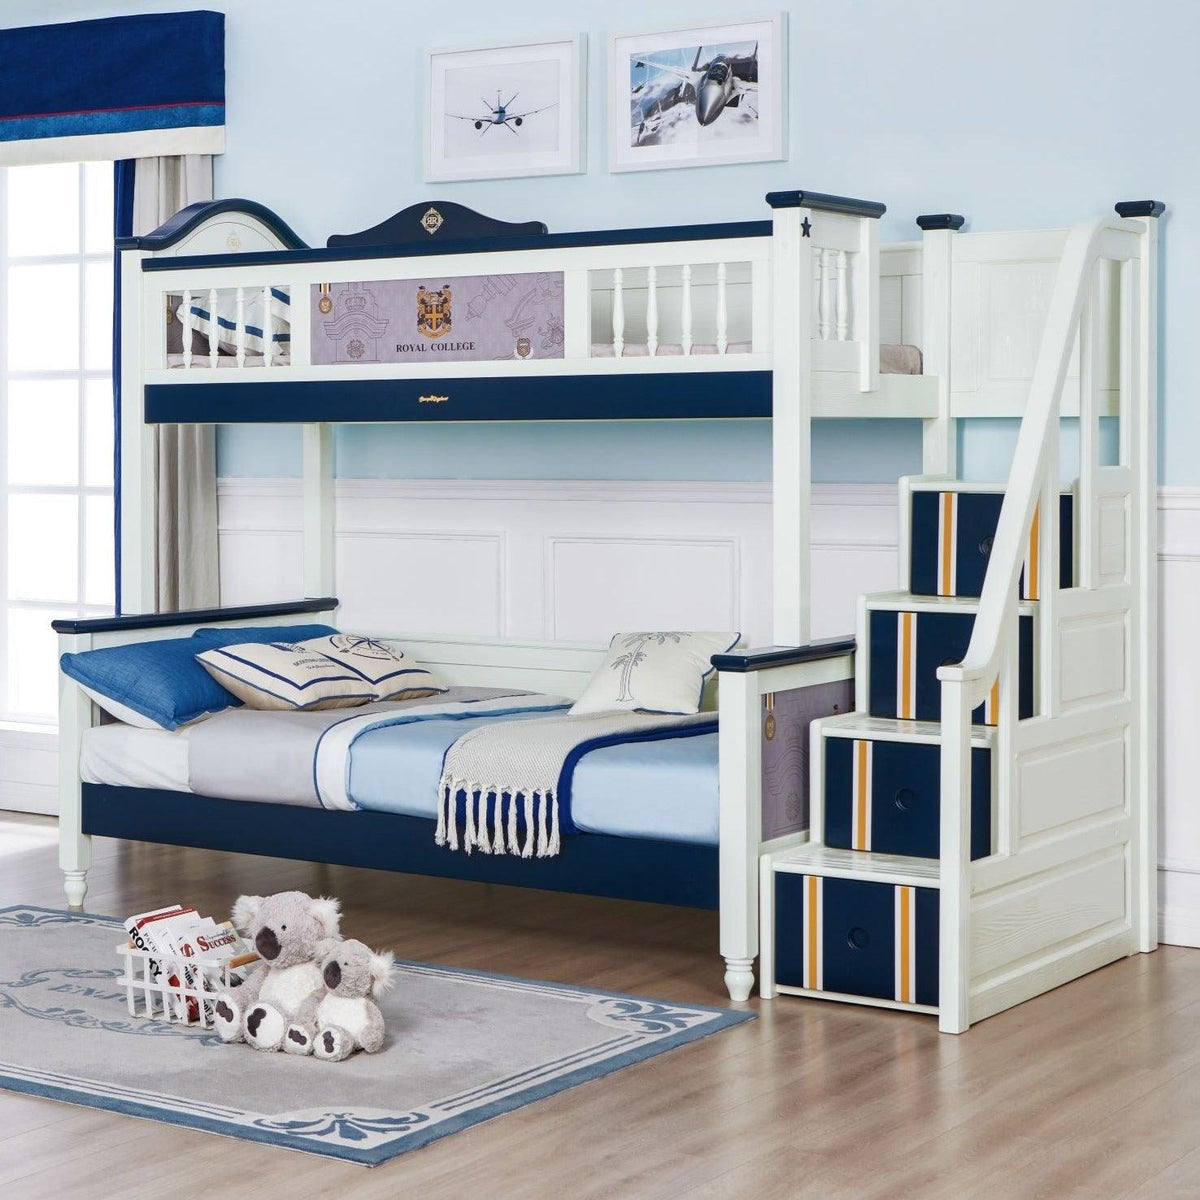 Sampo British Style Bunk Bed w Staircase - Kids Haven